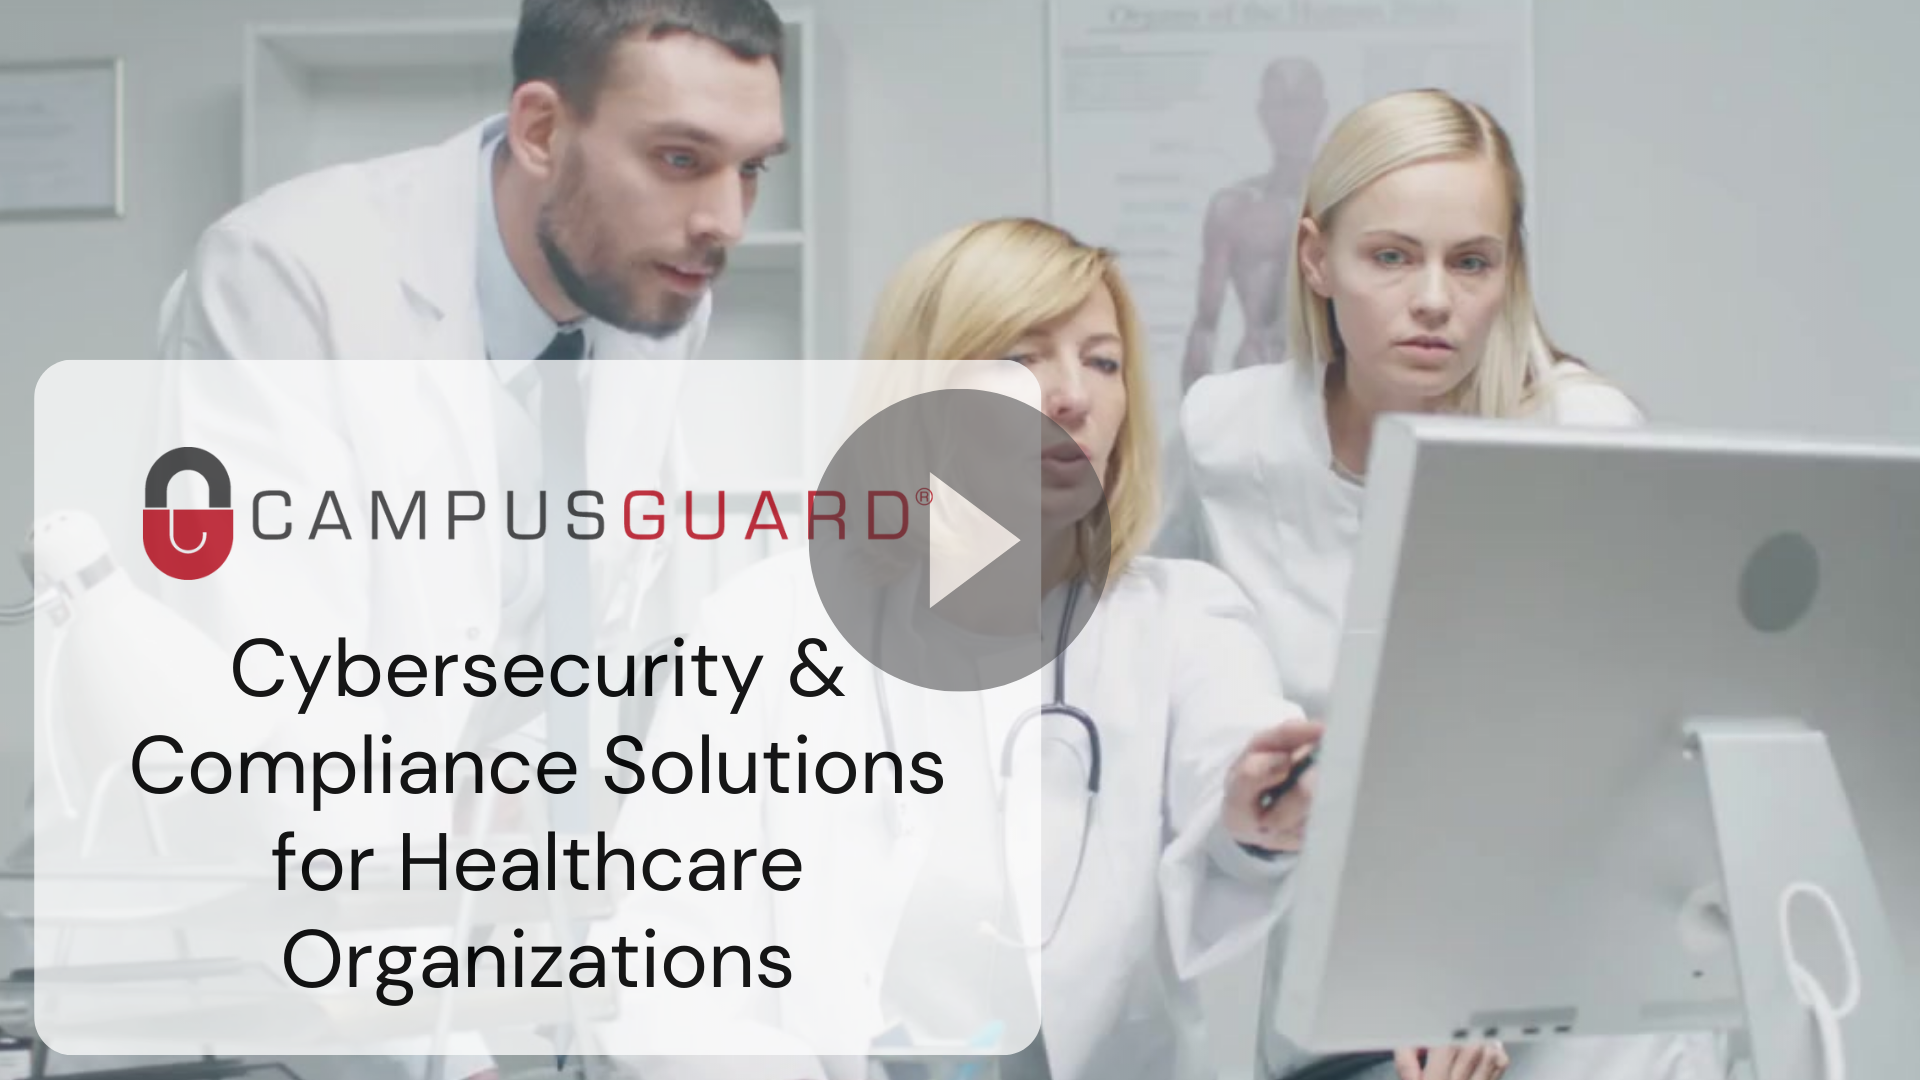 Cybersecurity & Compliance Solutions for Healthcare Organizations video